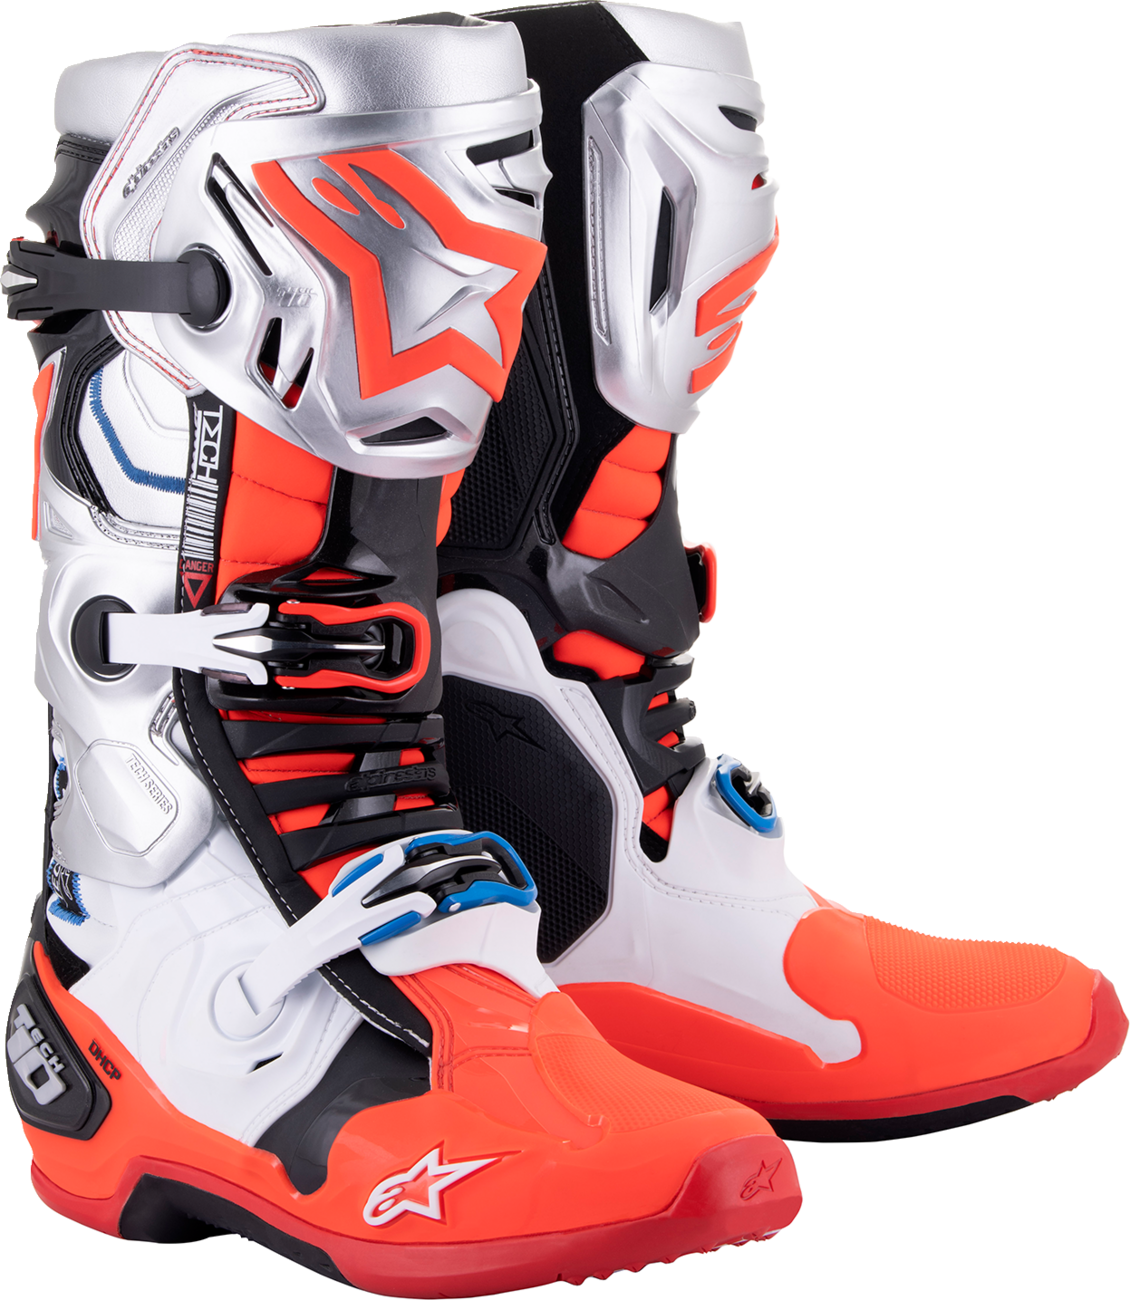 ALPINESTARS Limited Edition Vision Tech 10 Boots - Black/White/Silver/Red - US 10 2010020-1283-10